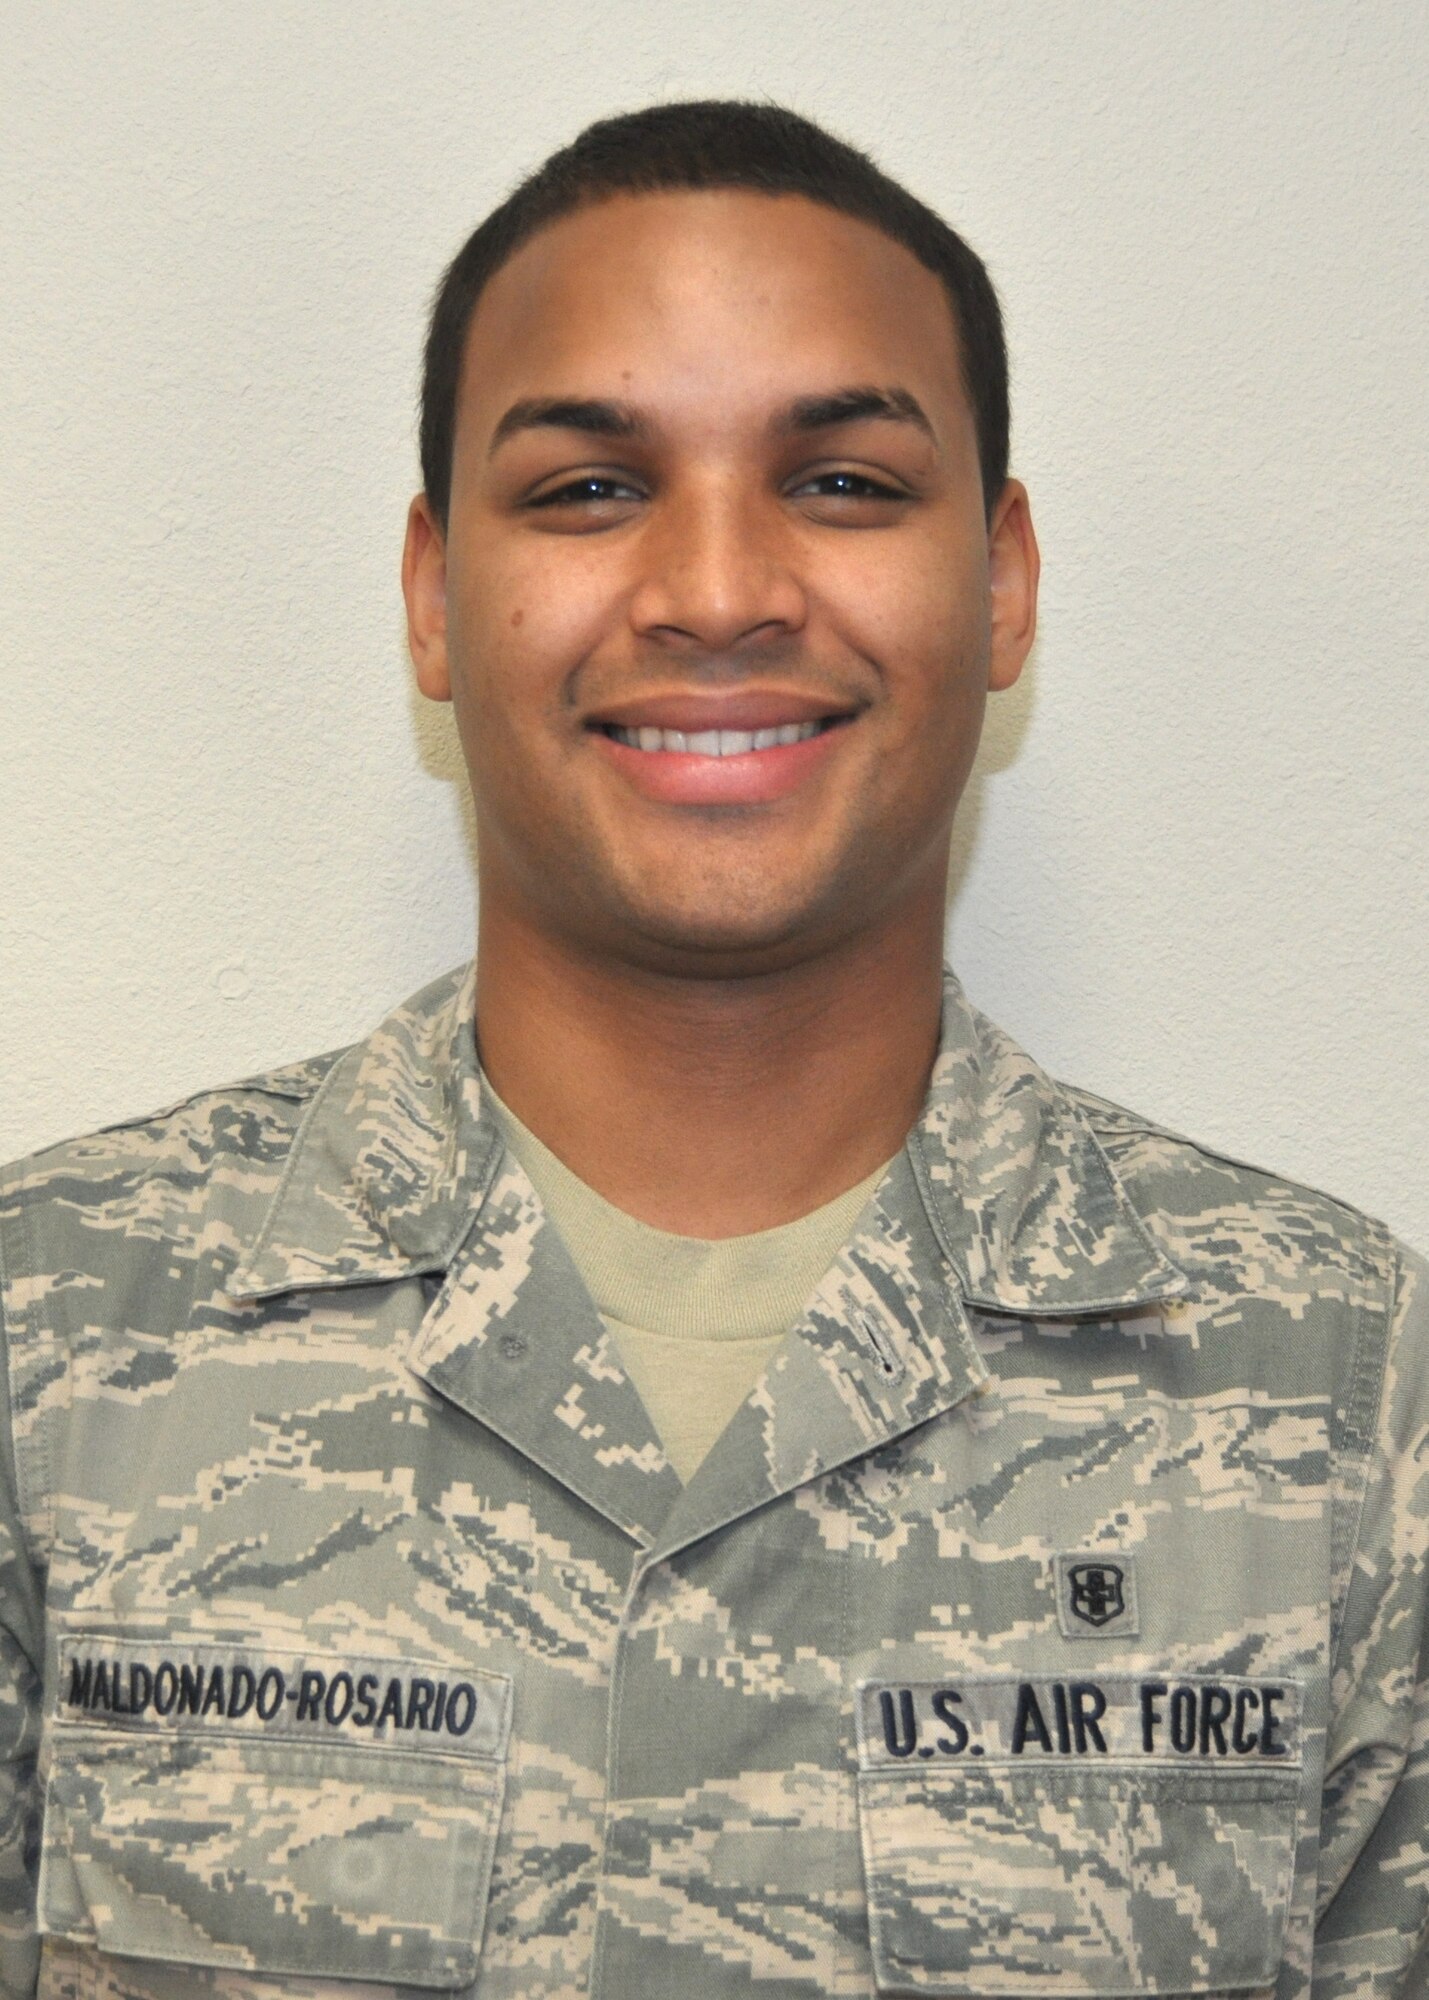 Senior Airman Emmanuel Maldonado-Rosario, 81st Dental Squadron dental technician, Keesler Air Force Base, Miss., has been selected to become a member of the Air Force's “Tops in Blue” entertainment group.  (U.S. Air Force photo by Steve Pivnick)